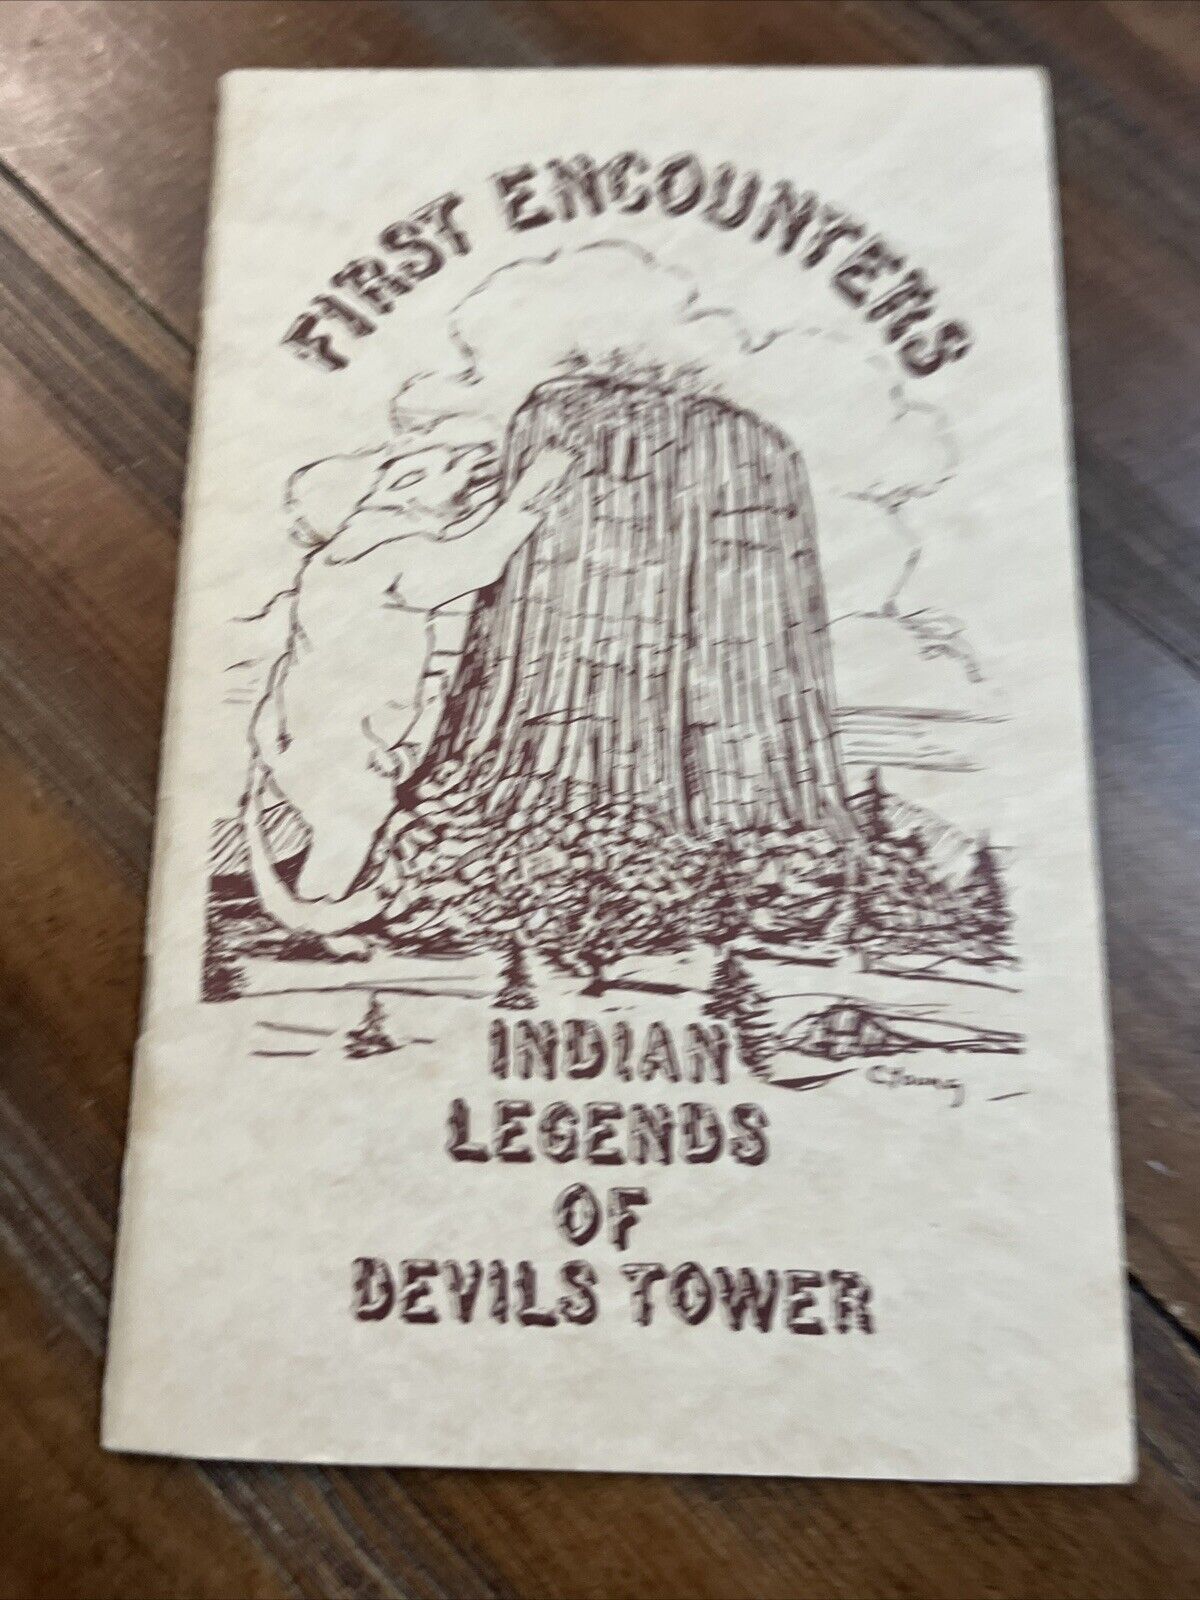 Vtg 1982 Indian Legends Of Devils Tower, First Encounters 32 Pages Ephemera